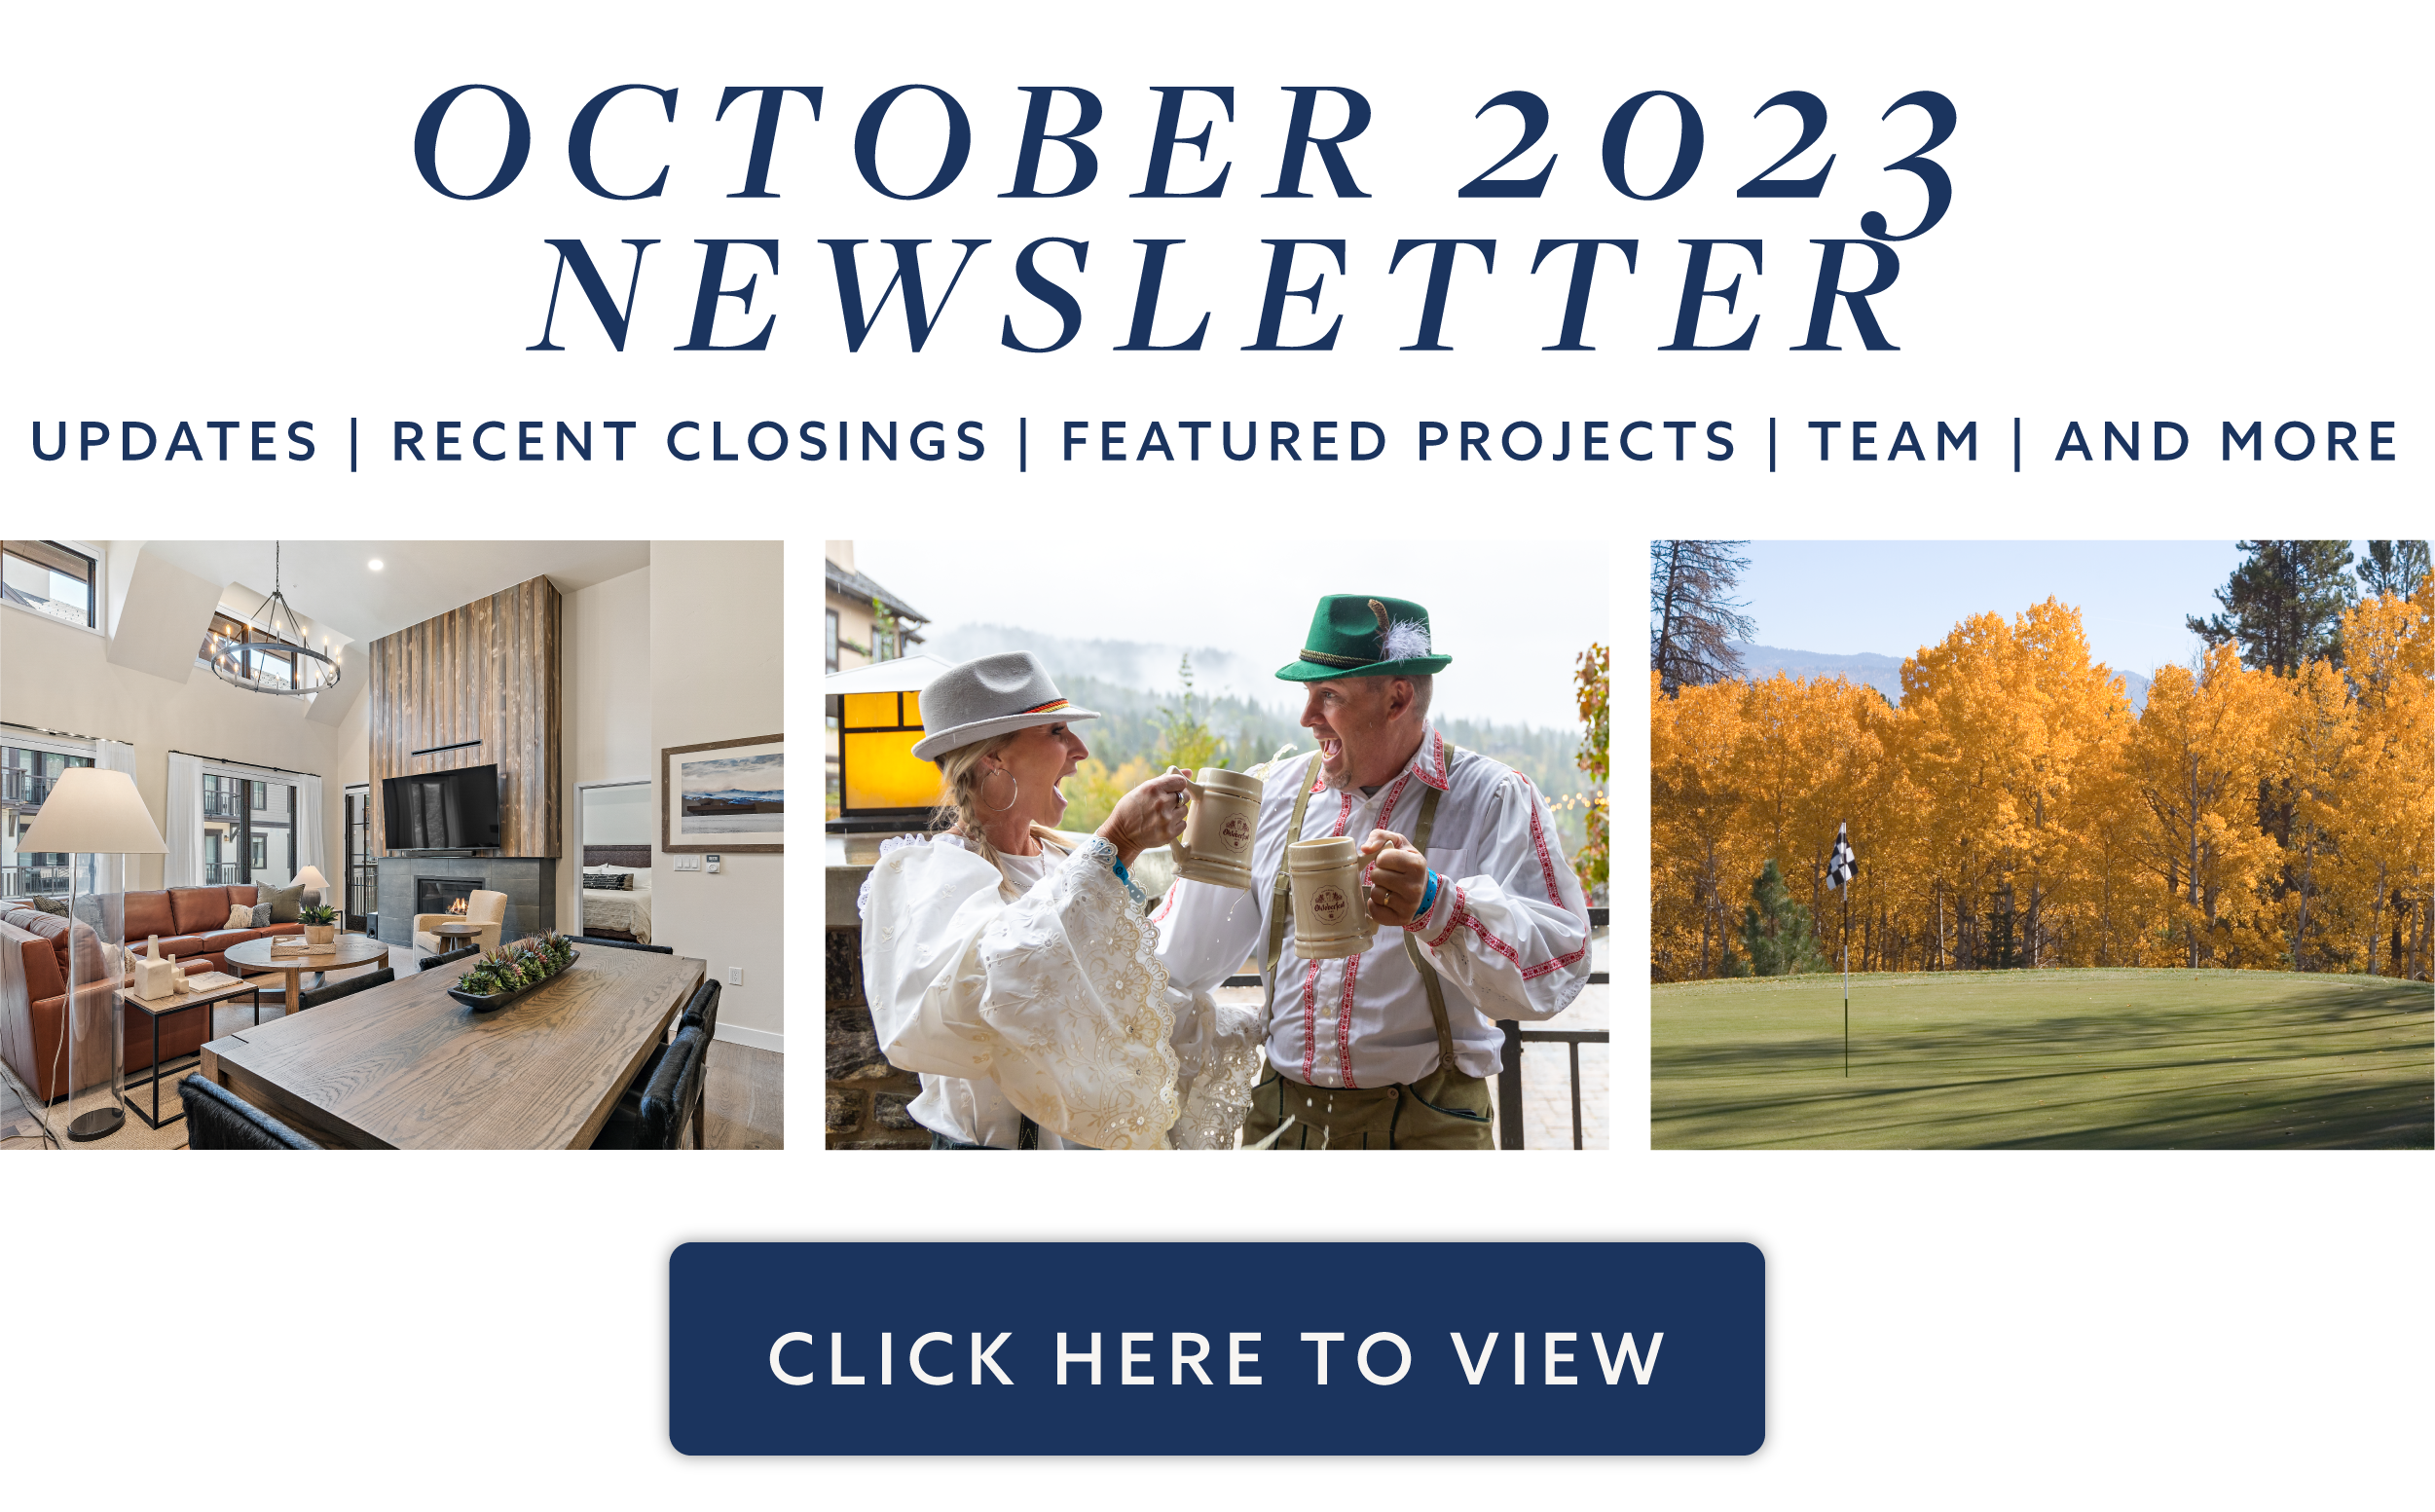 Click to view the October 2023 Newsletter.